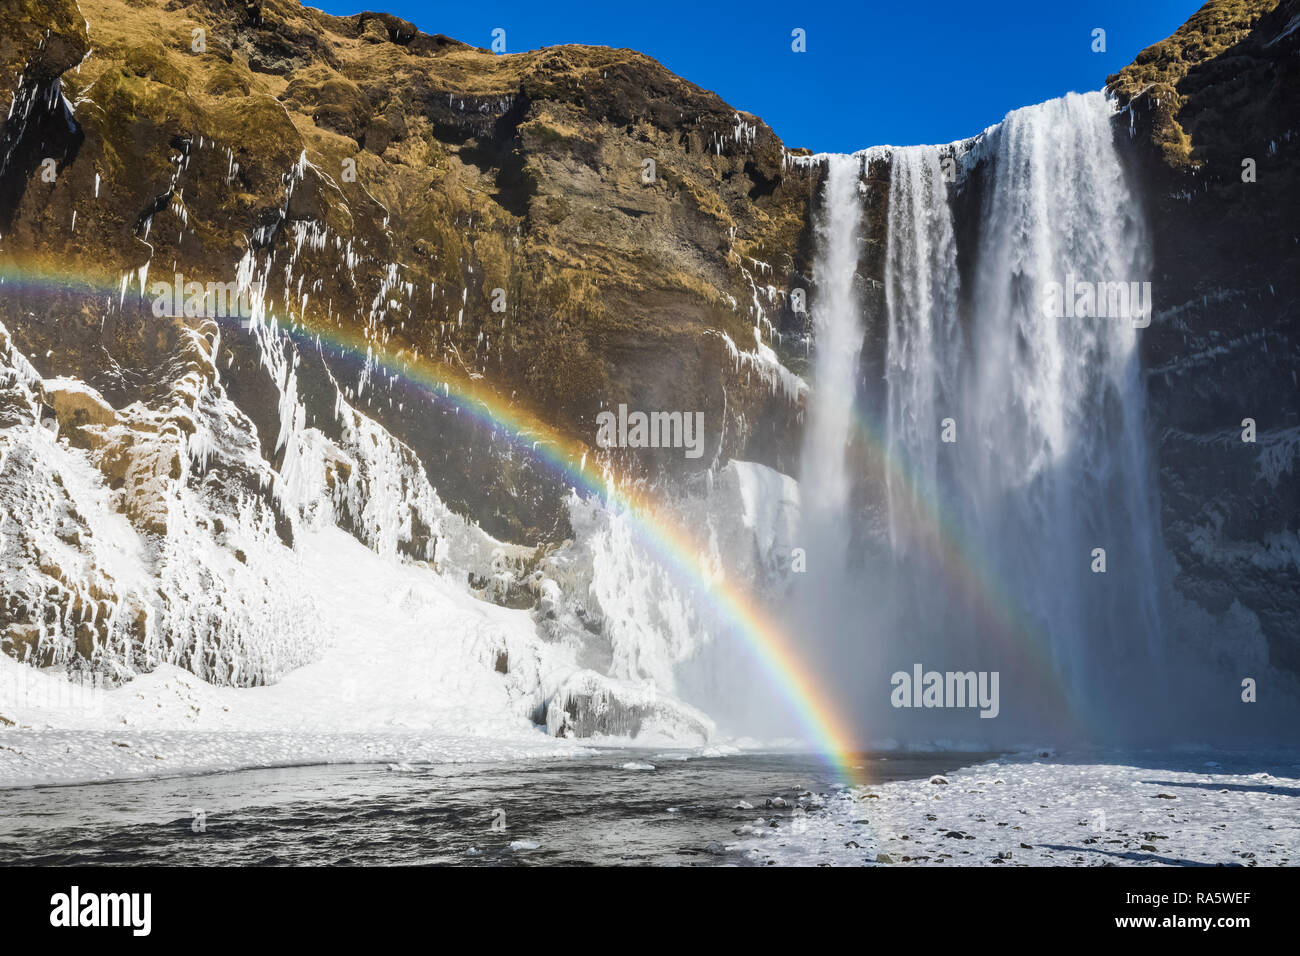 Skógafoss, a beautiful waterfall with a rainbow in the spray, along Skógá River and falling over former sea cliffs, along the South Coast of Iceland i Stock Photo